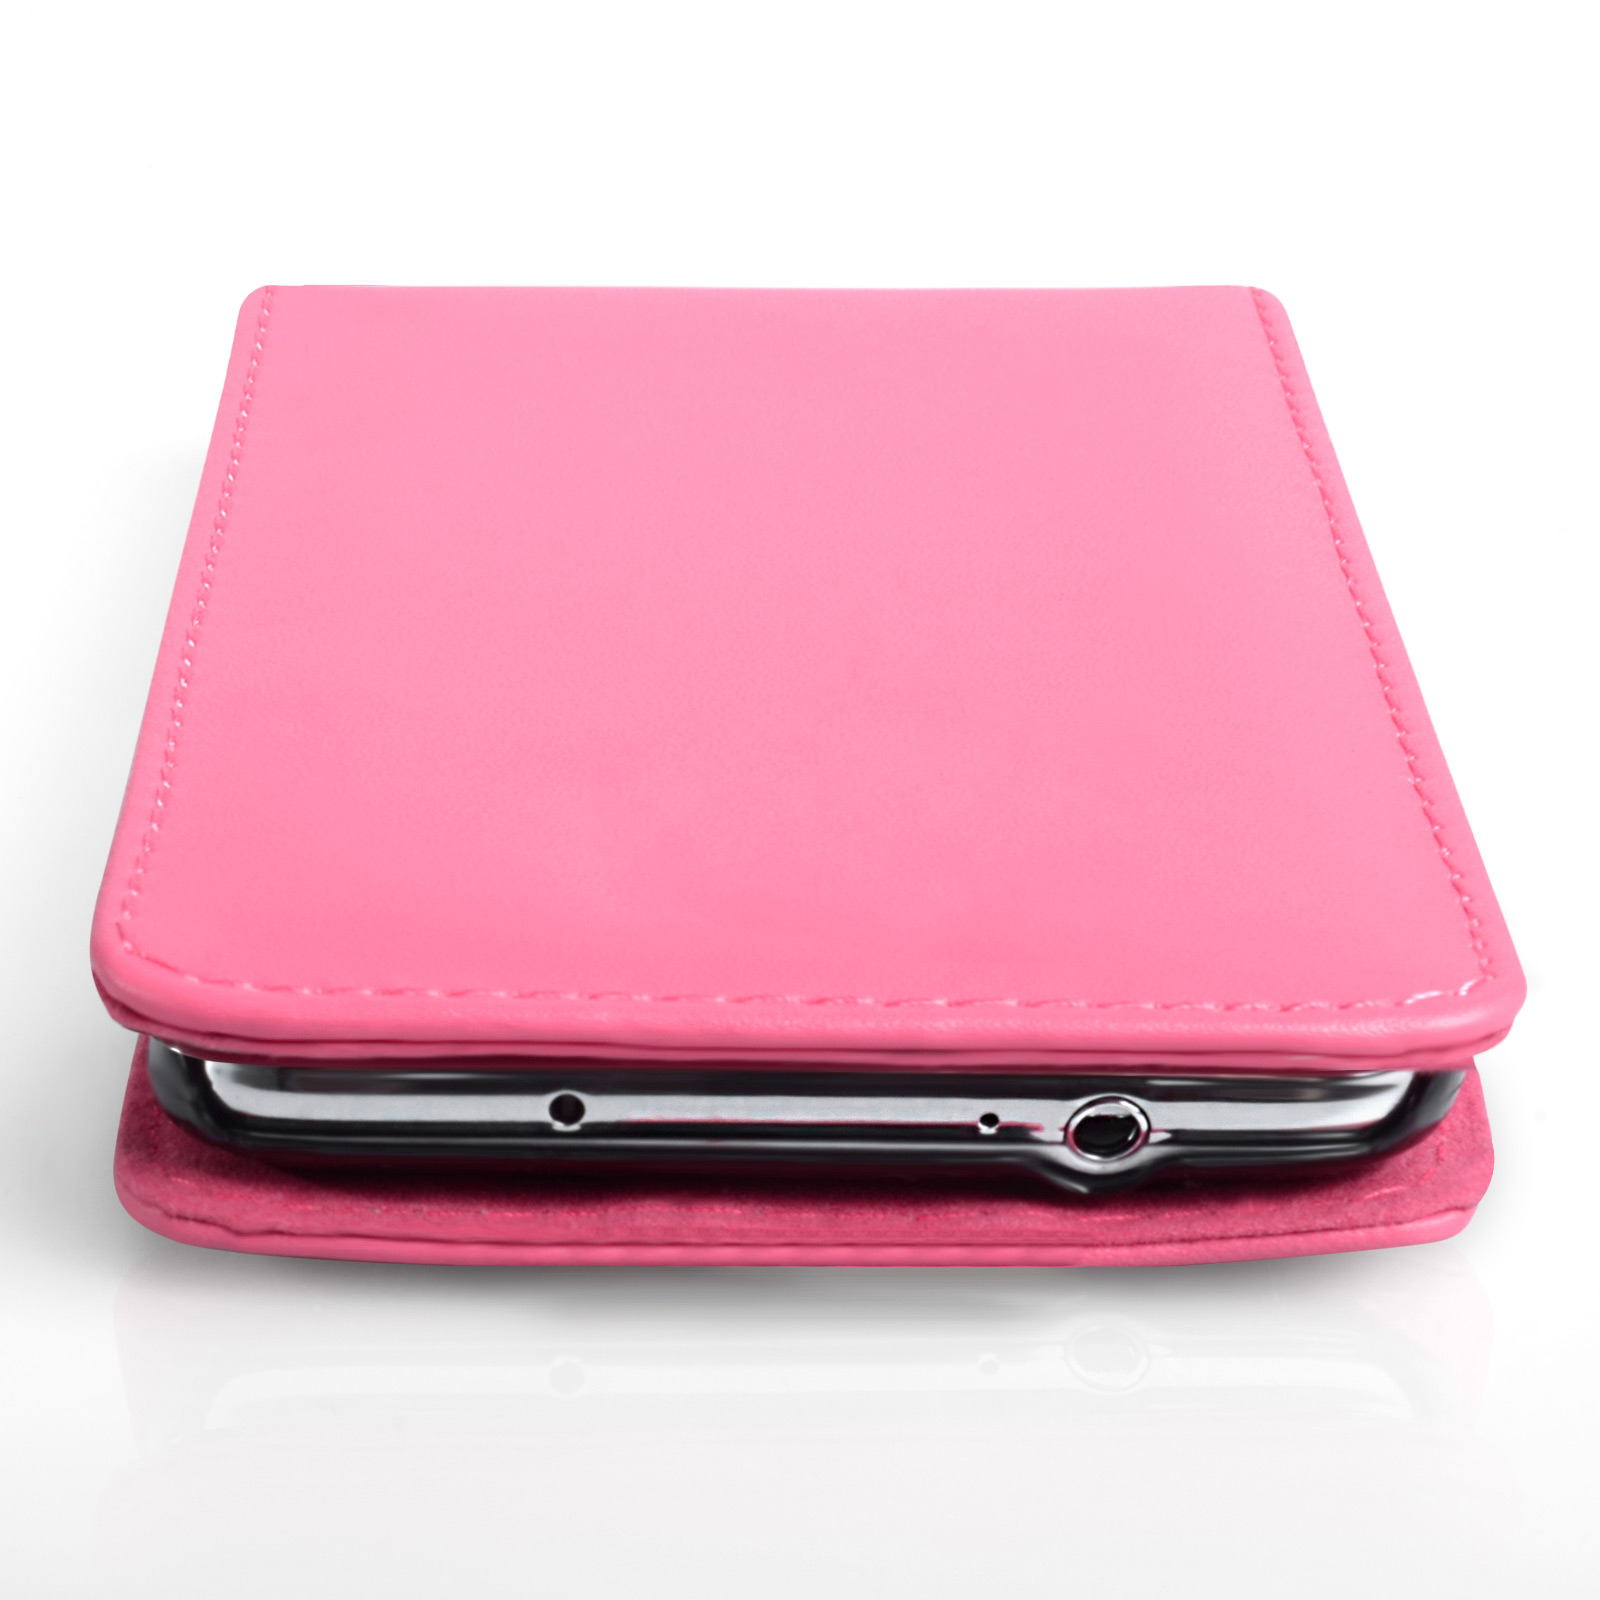 YouSave Samsung Galaxy Note 3 Neo Leather-Effect Flip Case - Hot Pink